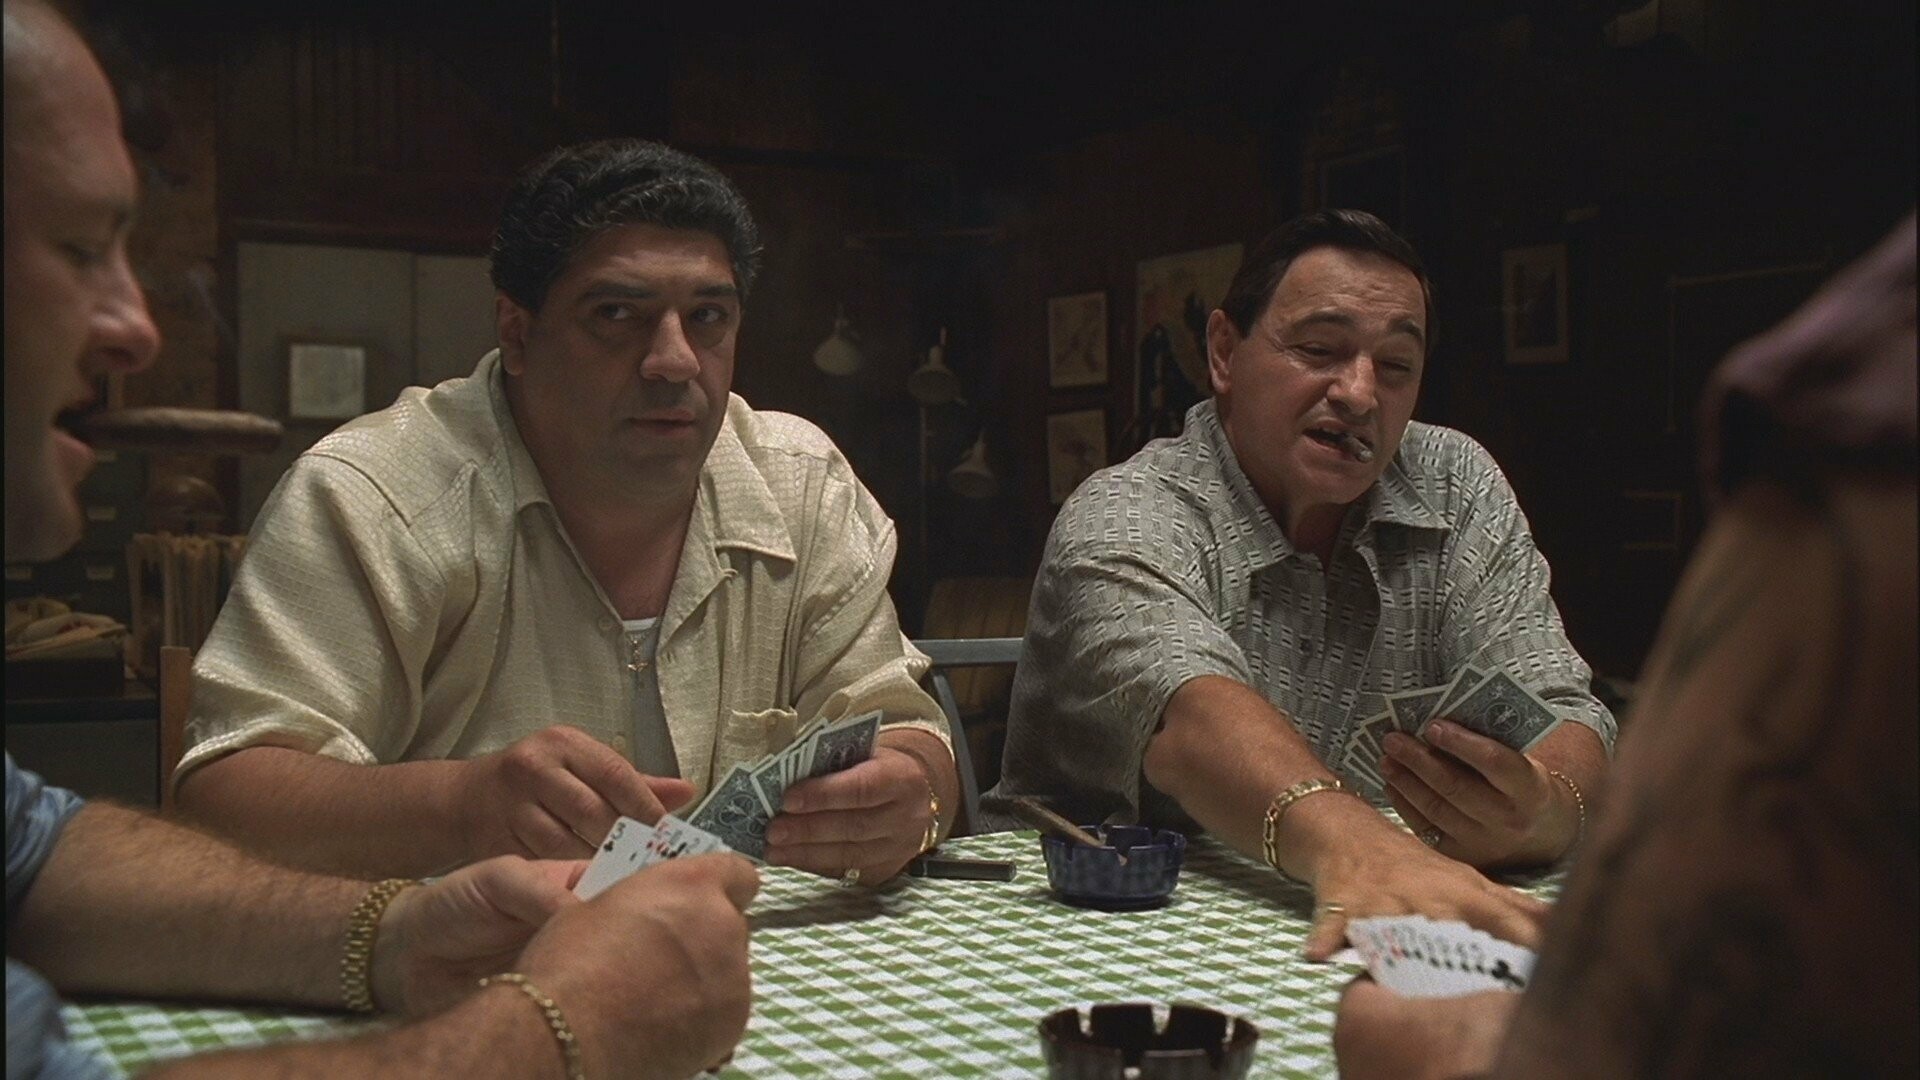 The Sopranos: Criminal series created by David Chase, Pilot episode shot in 1997. 1920x1080 Full HD Background.